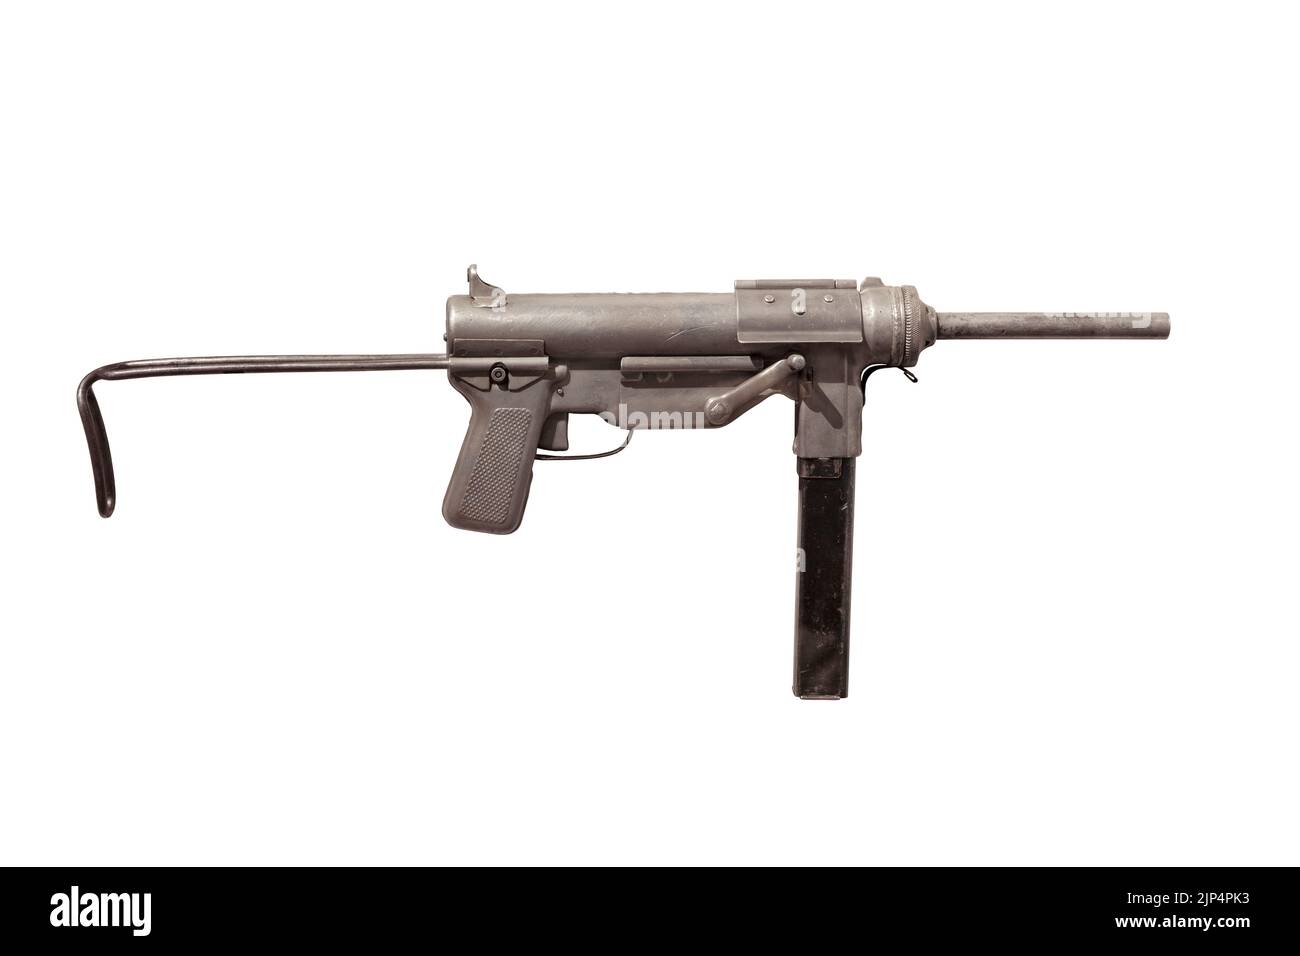 M3 submachine gun also known as a grease gun isolated on a white background Stock Photo